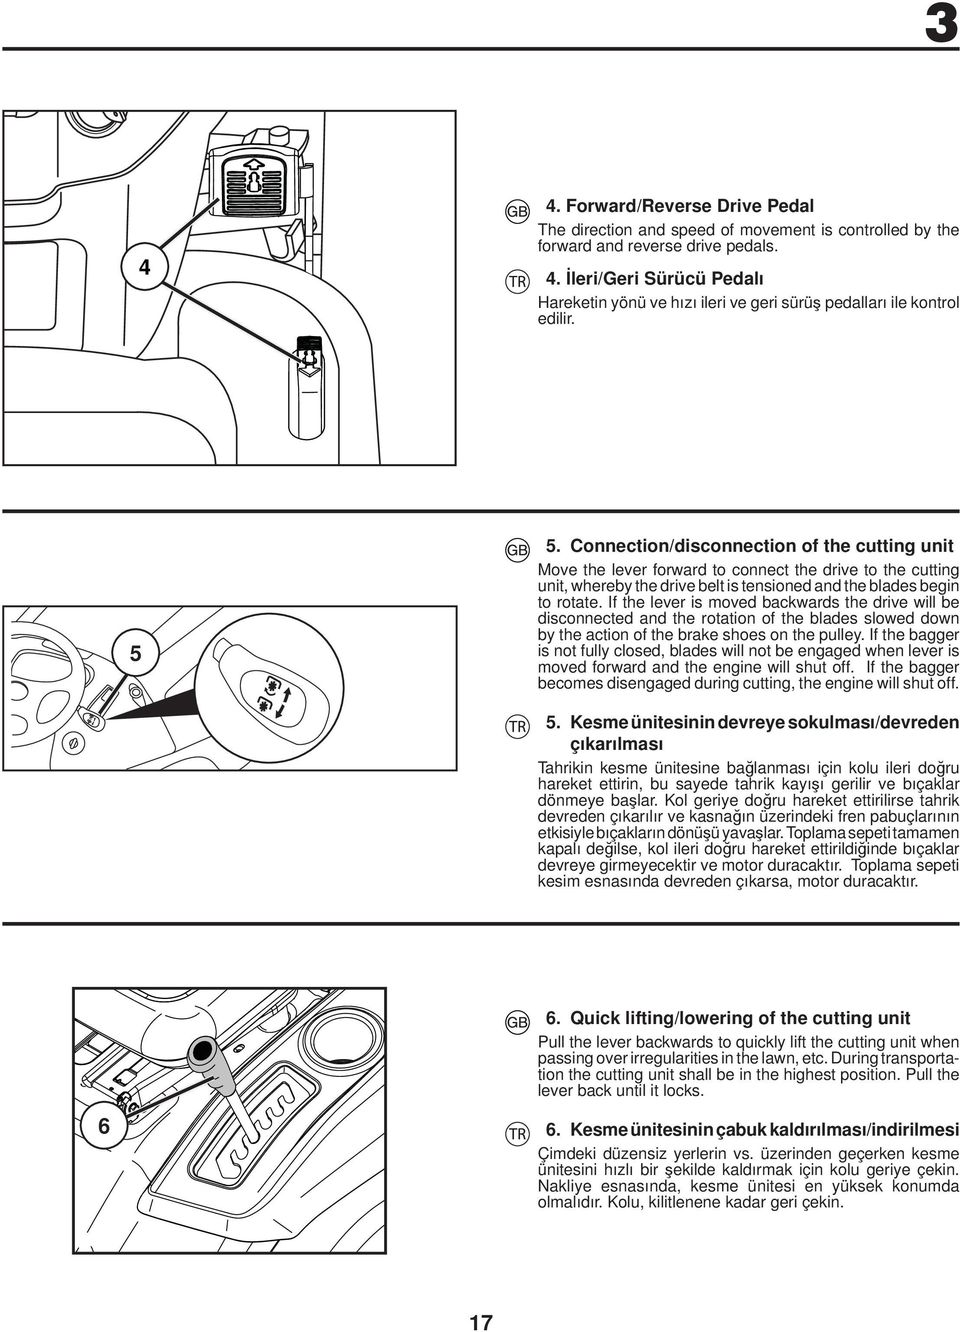 If the lever is moved backwards the drive will be disconnected and the rotation of the blades slowed down by the action of the brake shoes on the pulley.